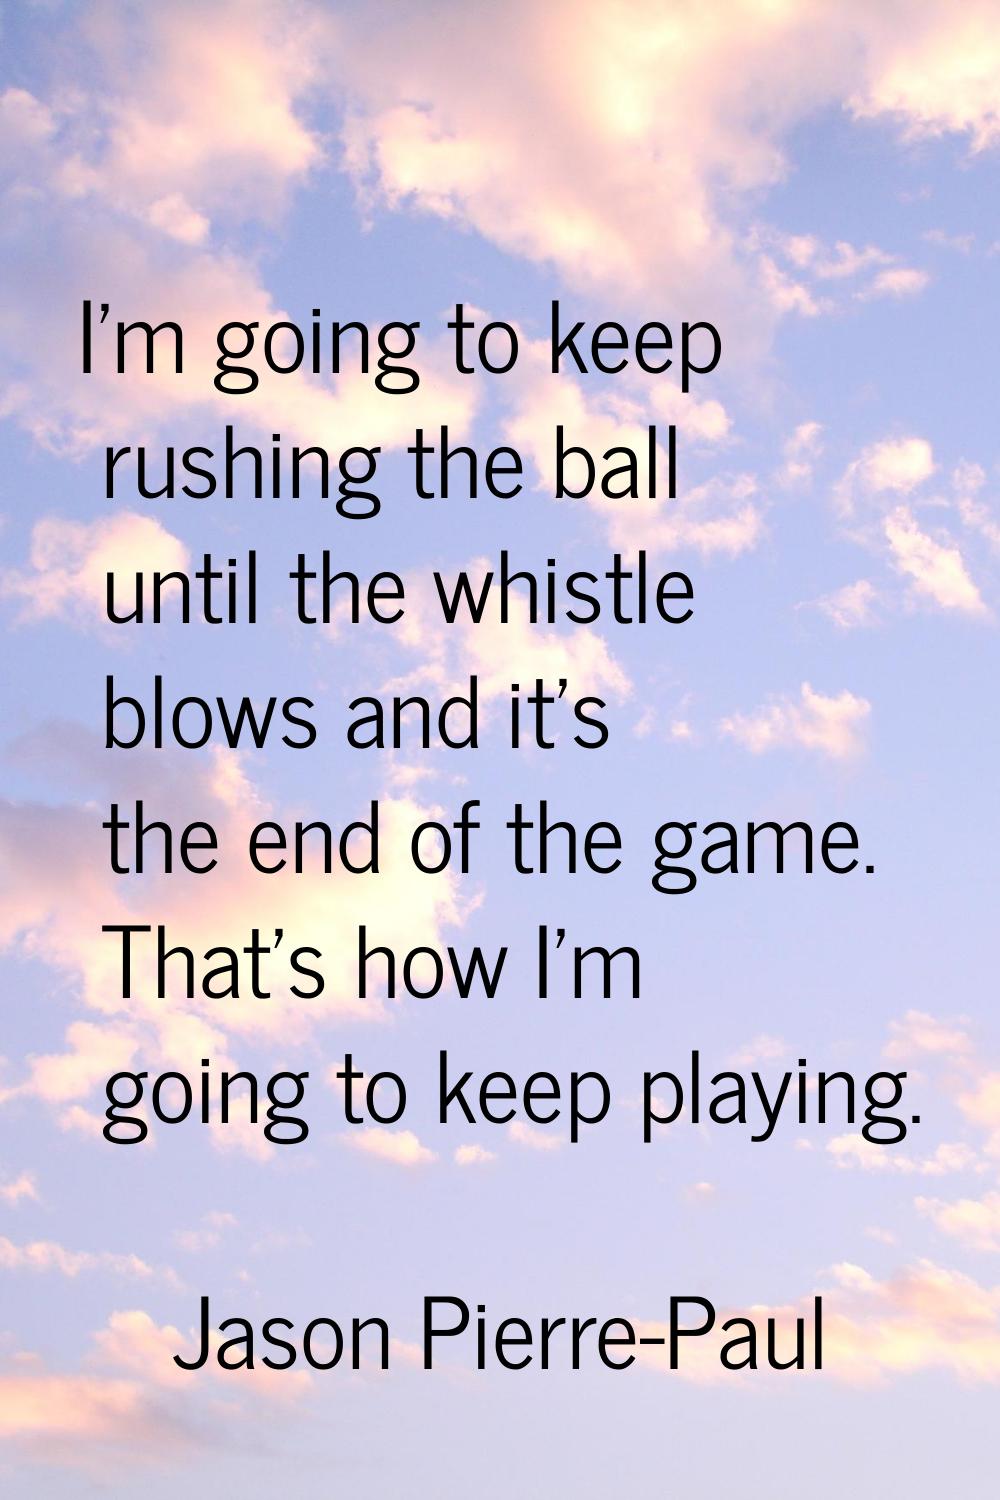 I'm going to keep rushing the ball until the whistle blows and it's the end of the game. That's how